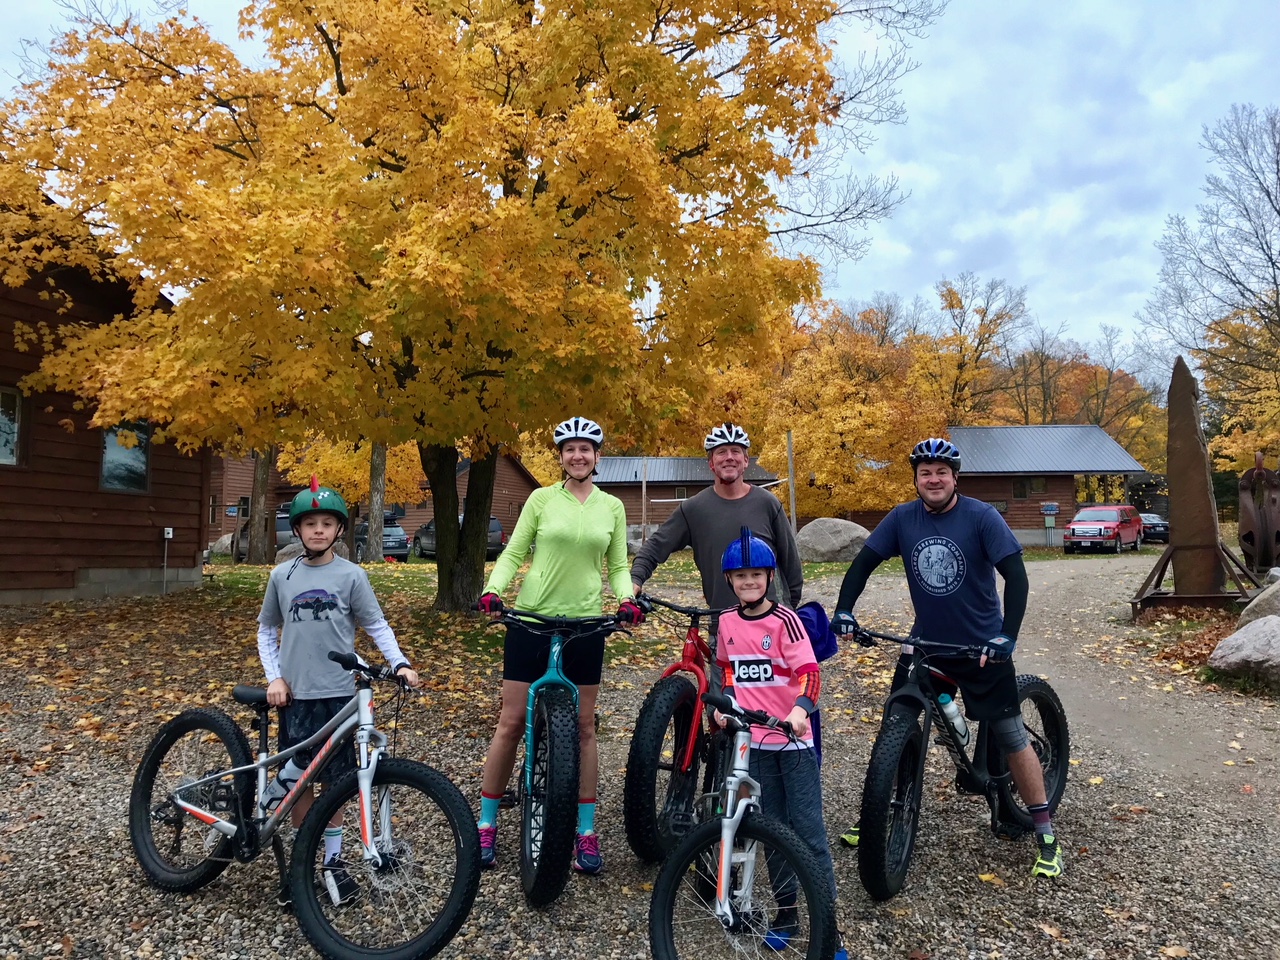 Group of riders heading out on fat bikes Tuesday morning, October 3rd, 2017.